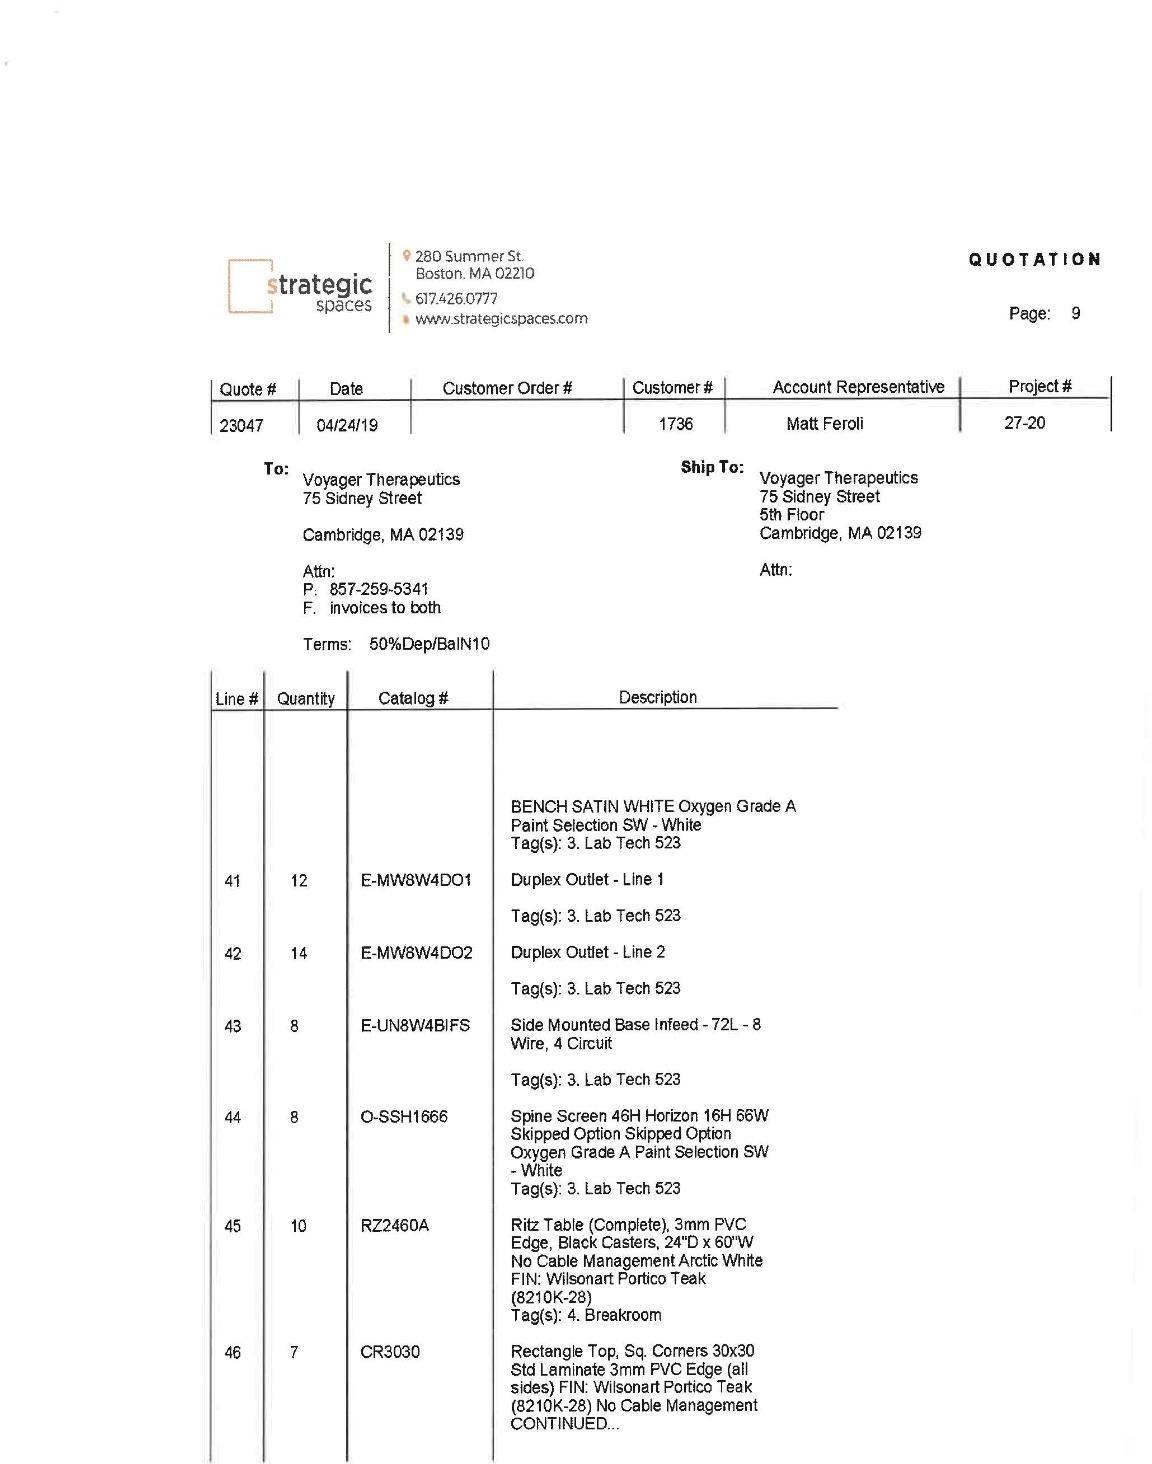 Ex C to Voyager BioNTech Sublease Agreement_Page_09